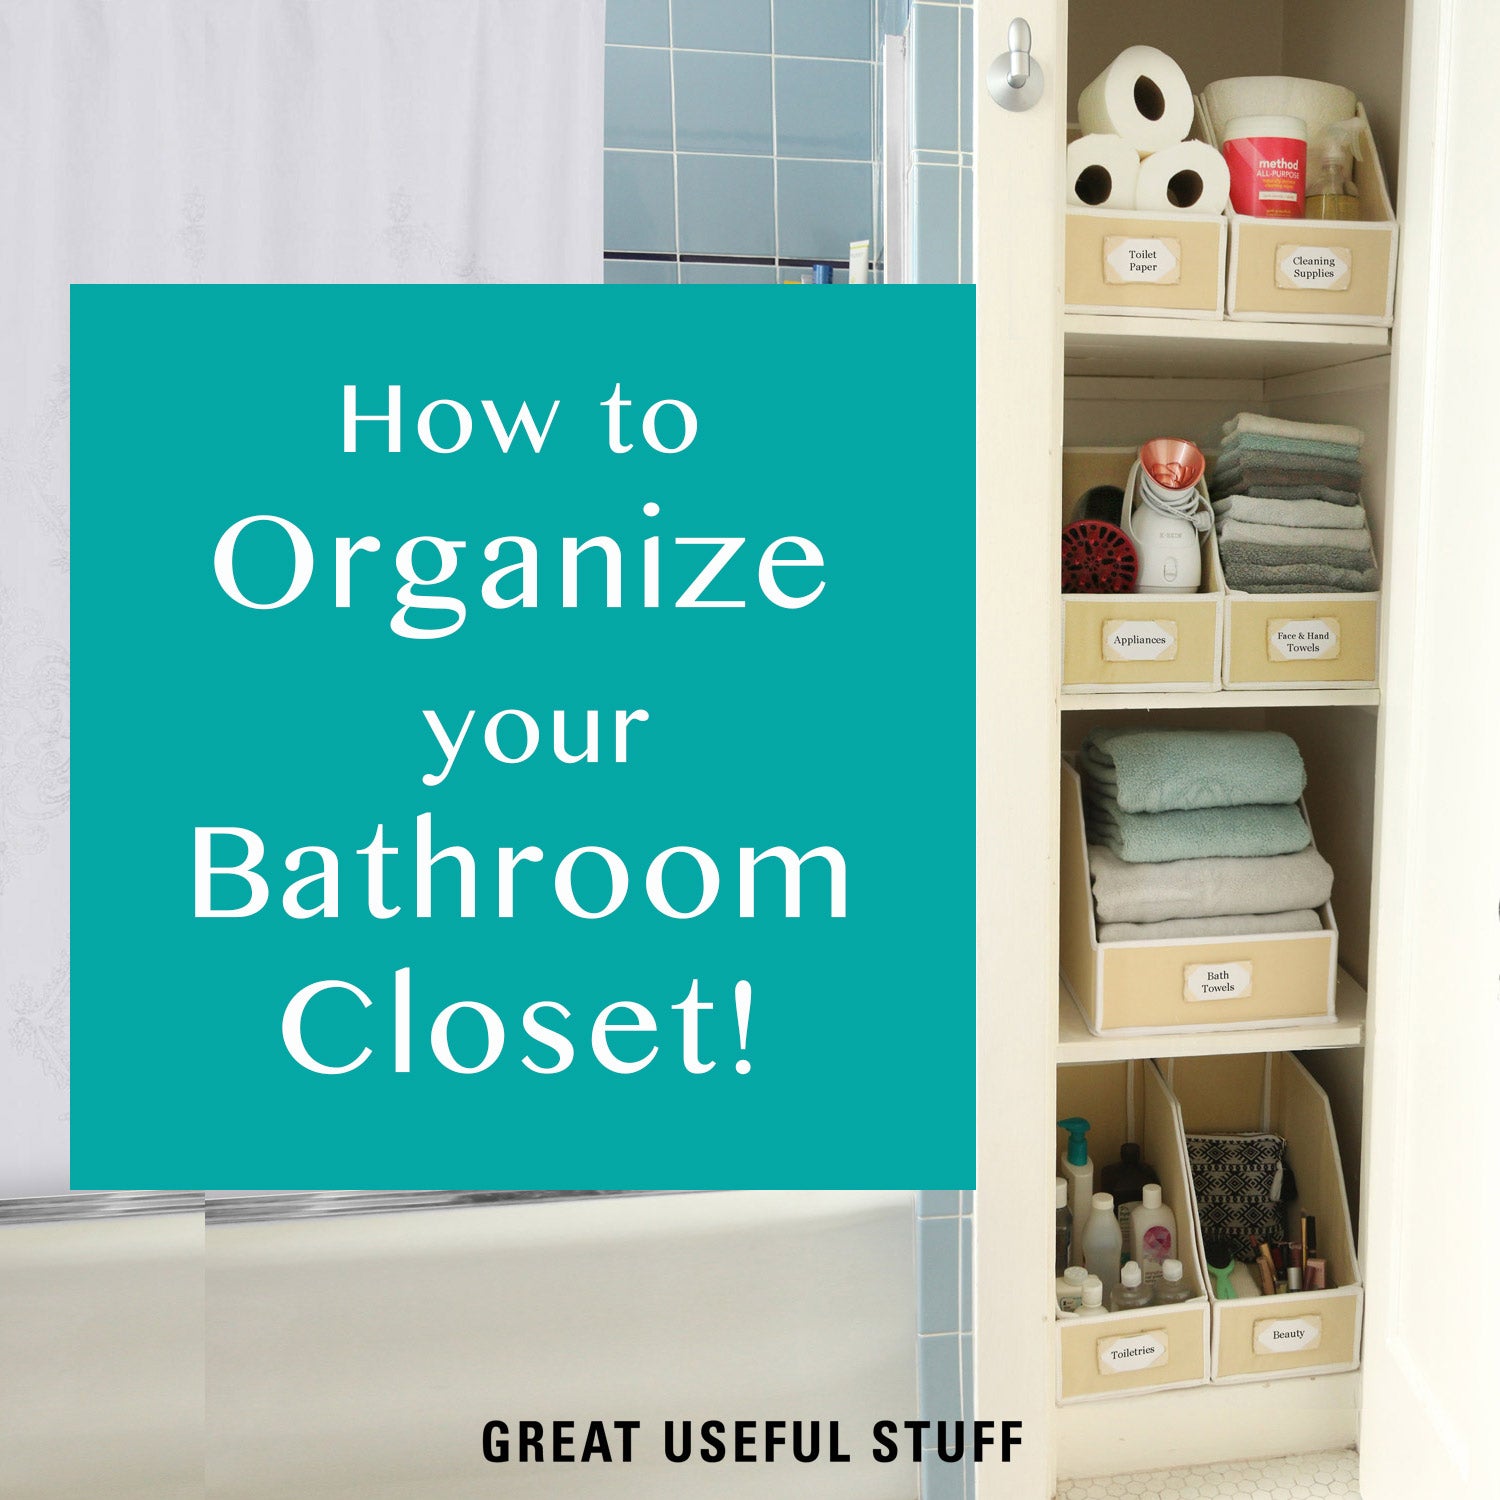 How to Organize a Bathroom Closet - Tips From Experts